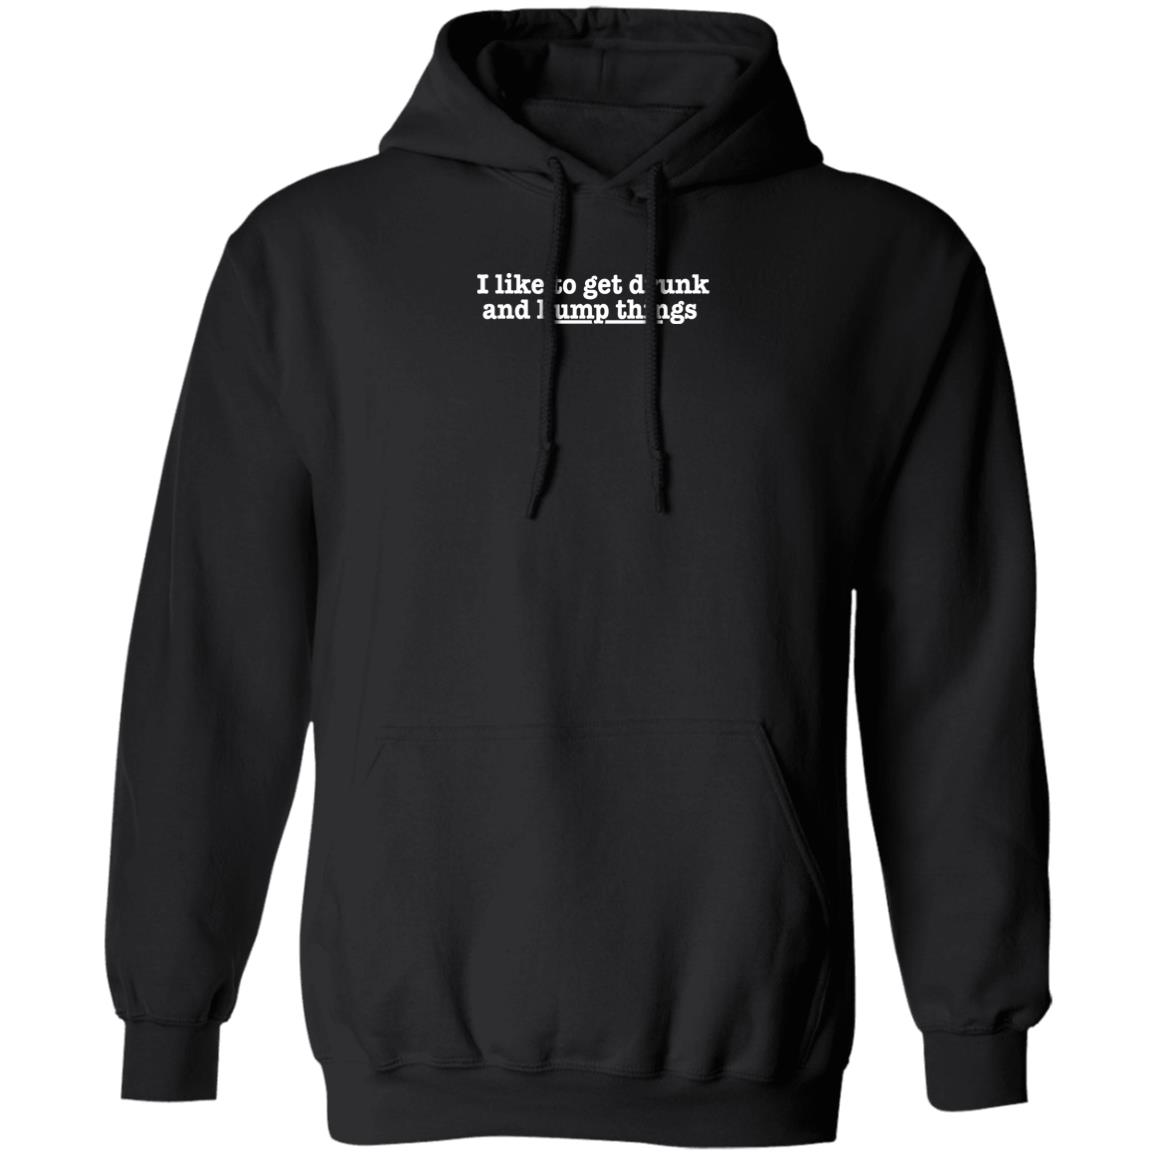 I Like To Get Drunk And Hump Things Shirt Panetory – Graphic Design Apparel &Amp; Accessories Online